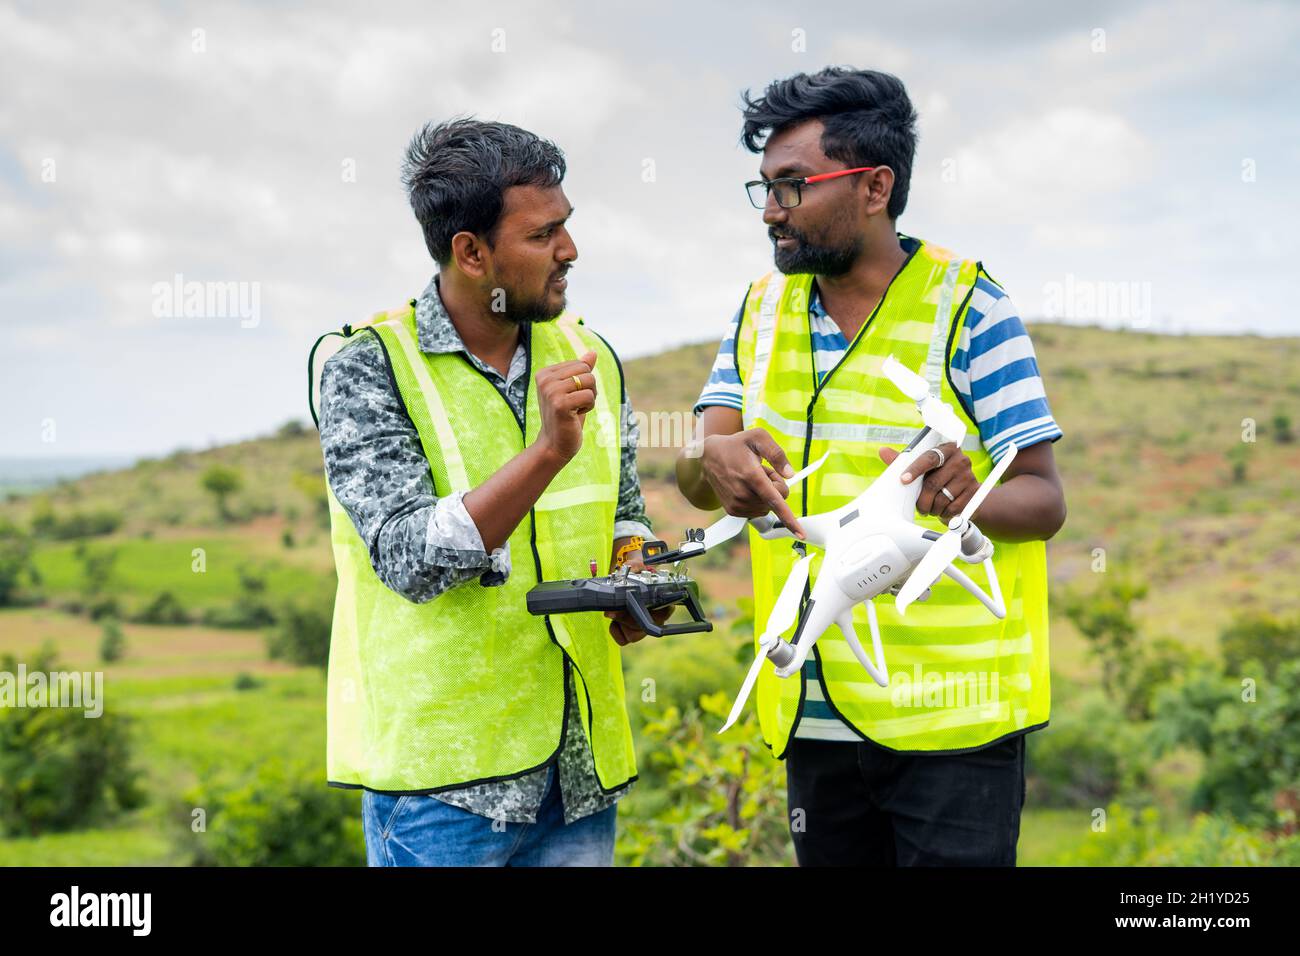 Selective focus on drone, Trainer teaching by explaining about drone operations to student - Concept drone or UAV pilot training. Stock Photo